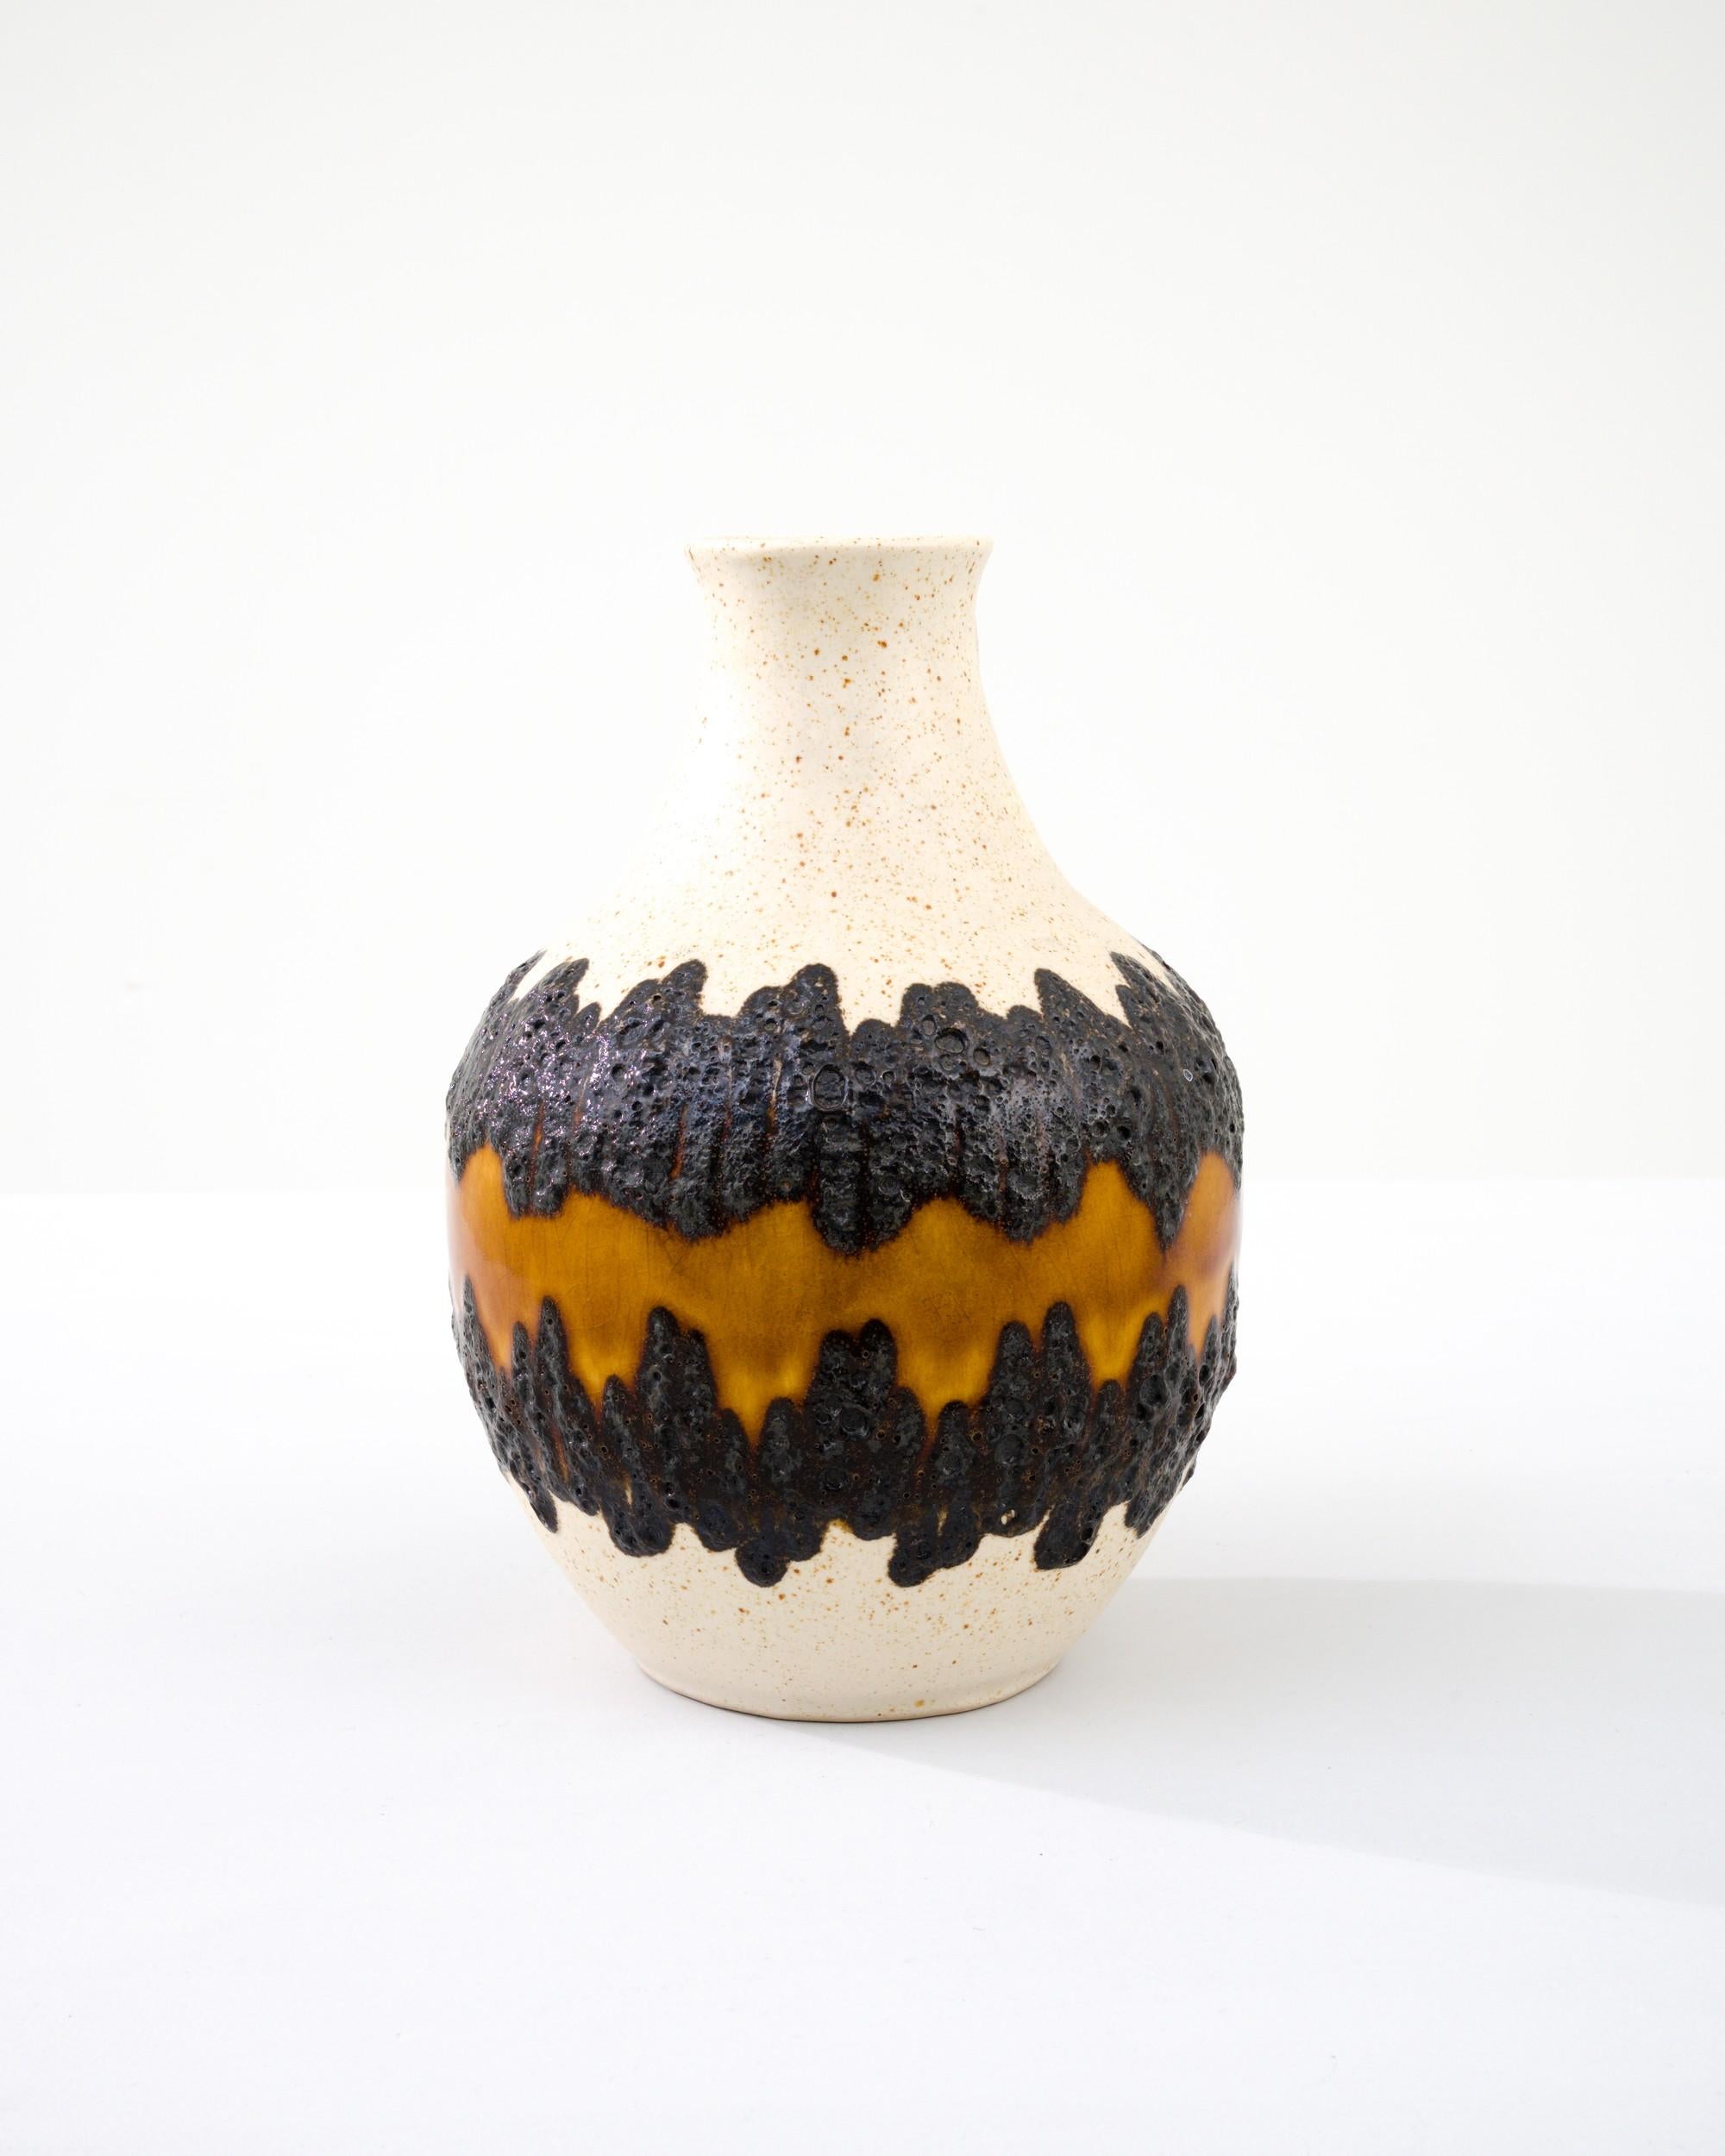 A ceramic vase from mid-20th century Germany. Neither large nor small, this studio made pot reflects the hand-held, and the handmade; the tactility of process and the artist's vision– realized on the potter’s wheel. Thick textured stripes ring the